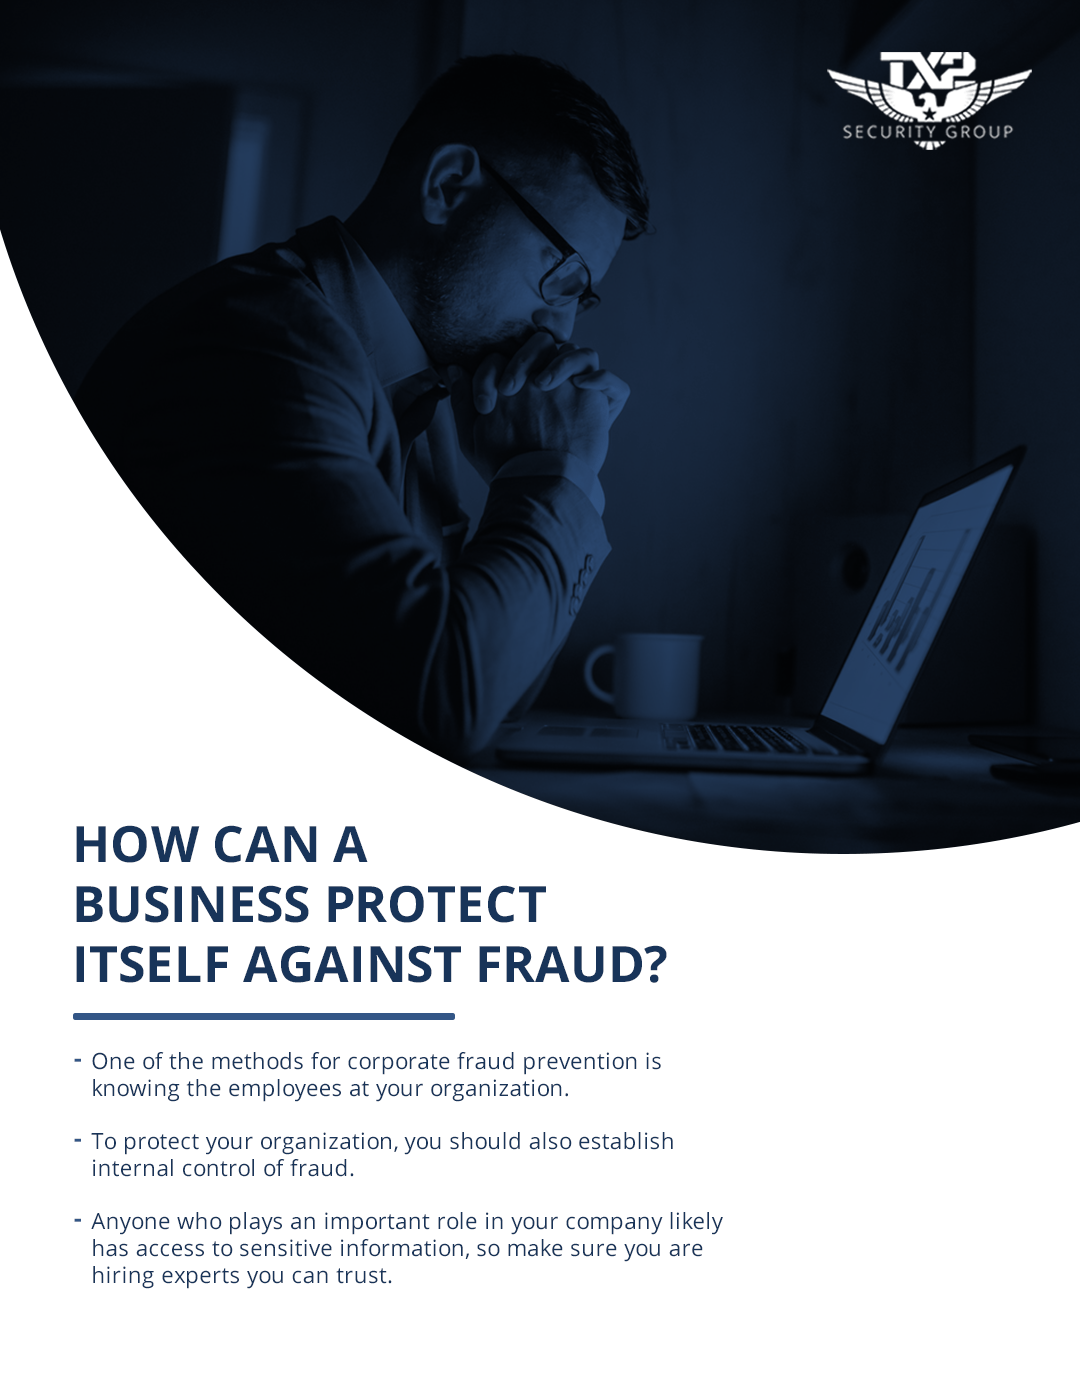 how-can-a-business-protect-itself-against-fraud-pinterest-5e72770eb4602.png